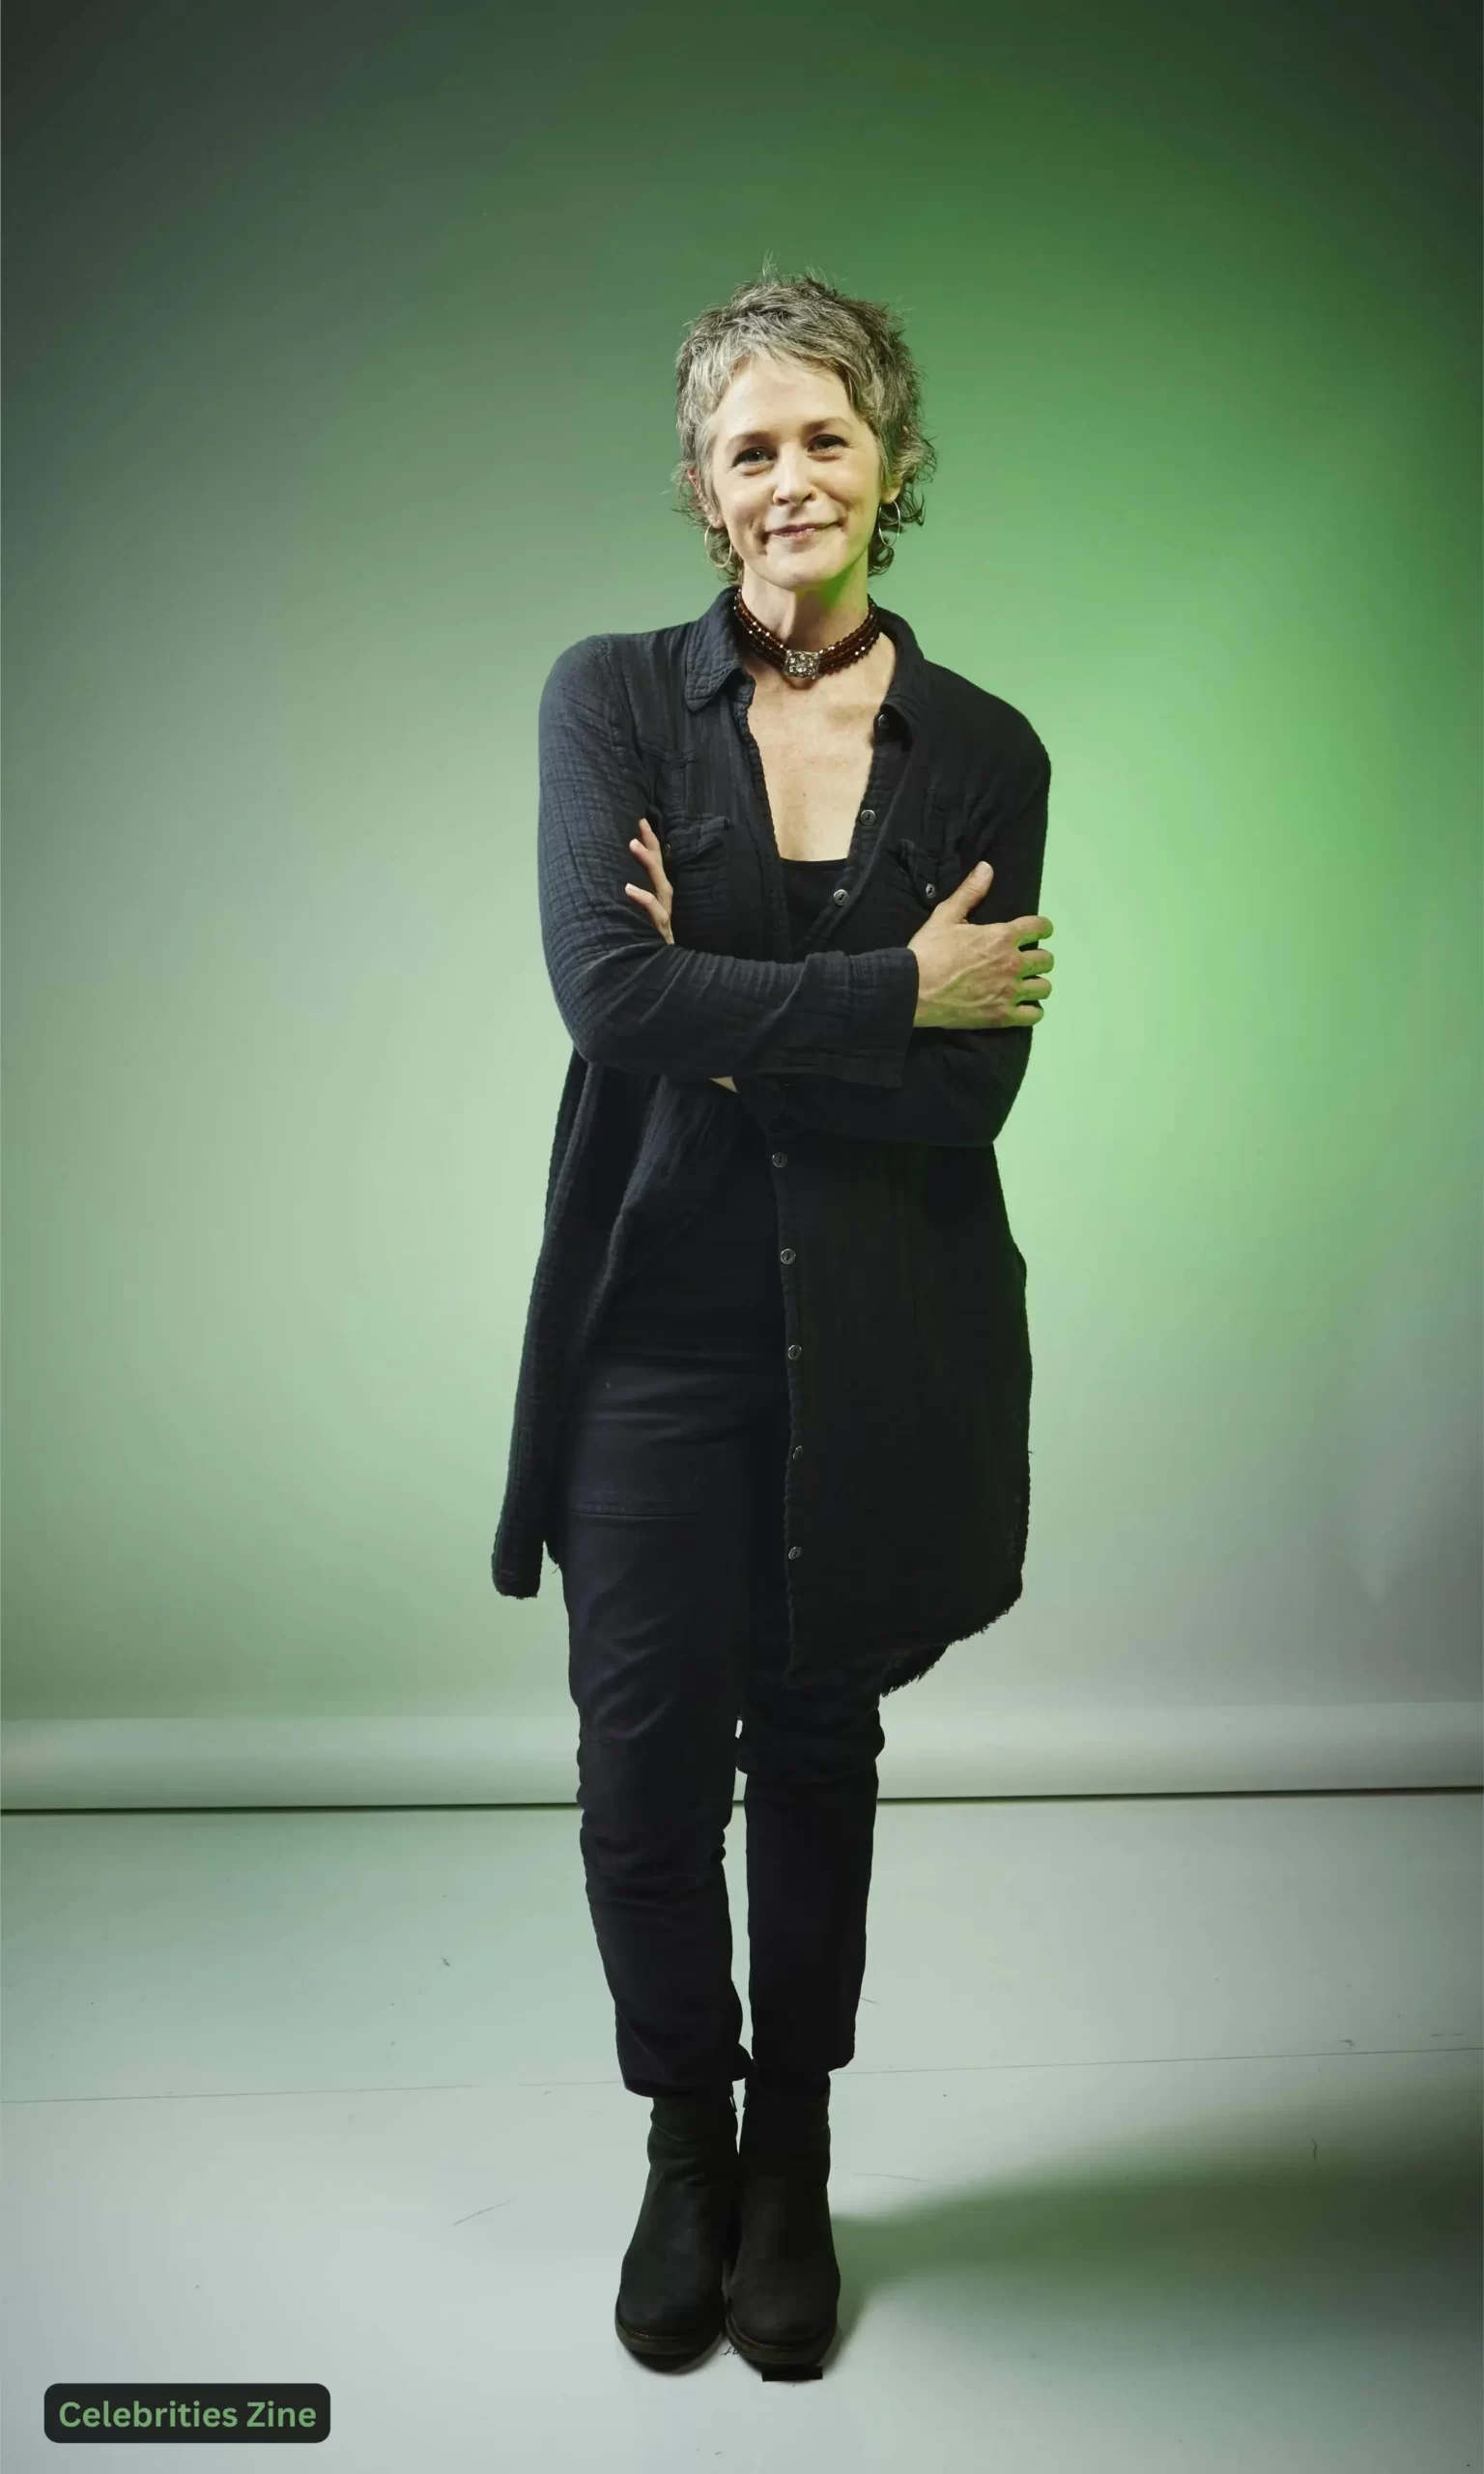 How Tall is Melissa Mcbride scaled